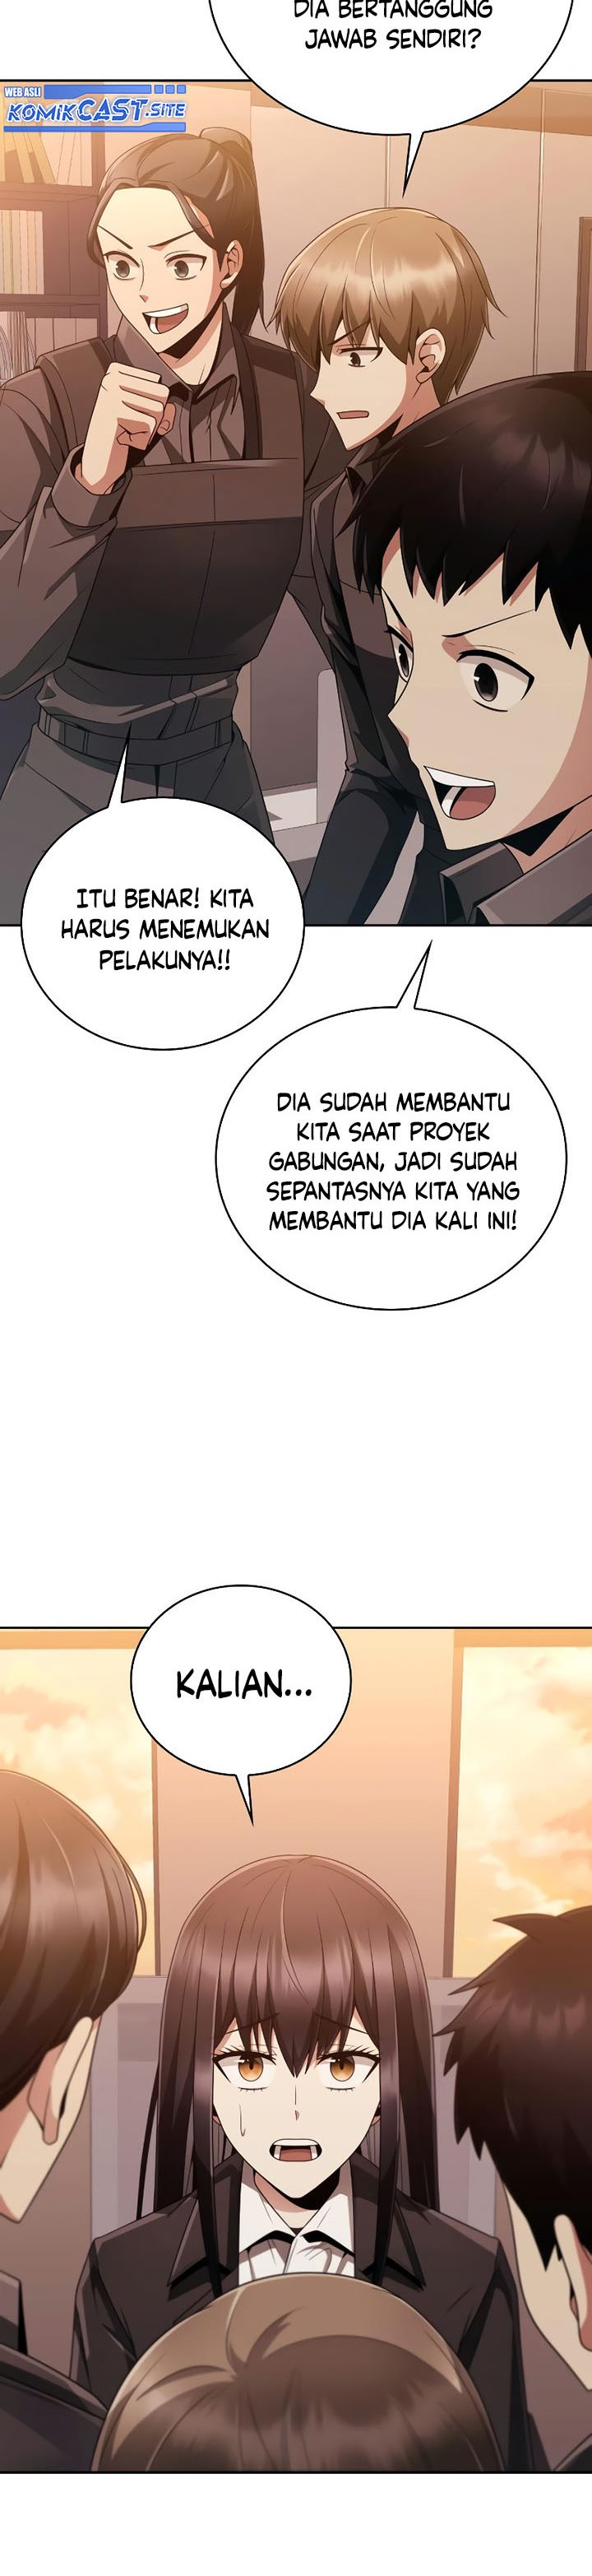 Dilarang COPAS - situs resmi www.mangacanblog.com - Komik clever cleaning life of the returned genius hunter 020 - chapter 20 21 Indonesia clever cleaning life of the returned genius hunter 020 - chapter 20 Terbaru 6|Baca Manga Komik Indonesia|Mangacan